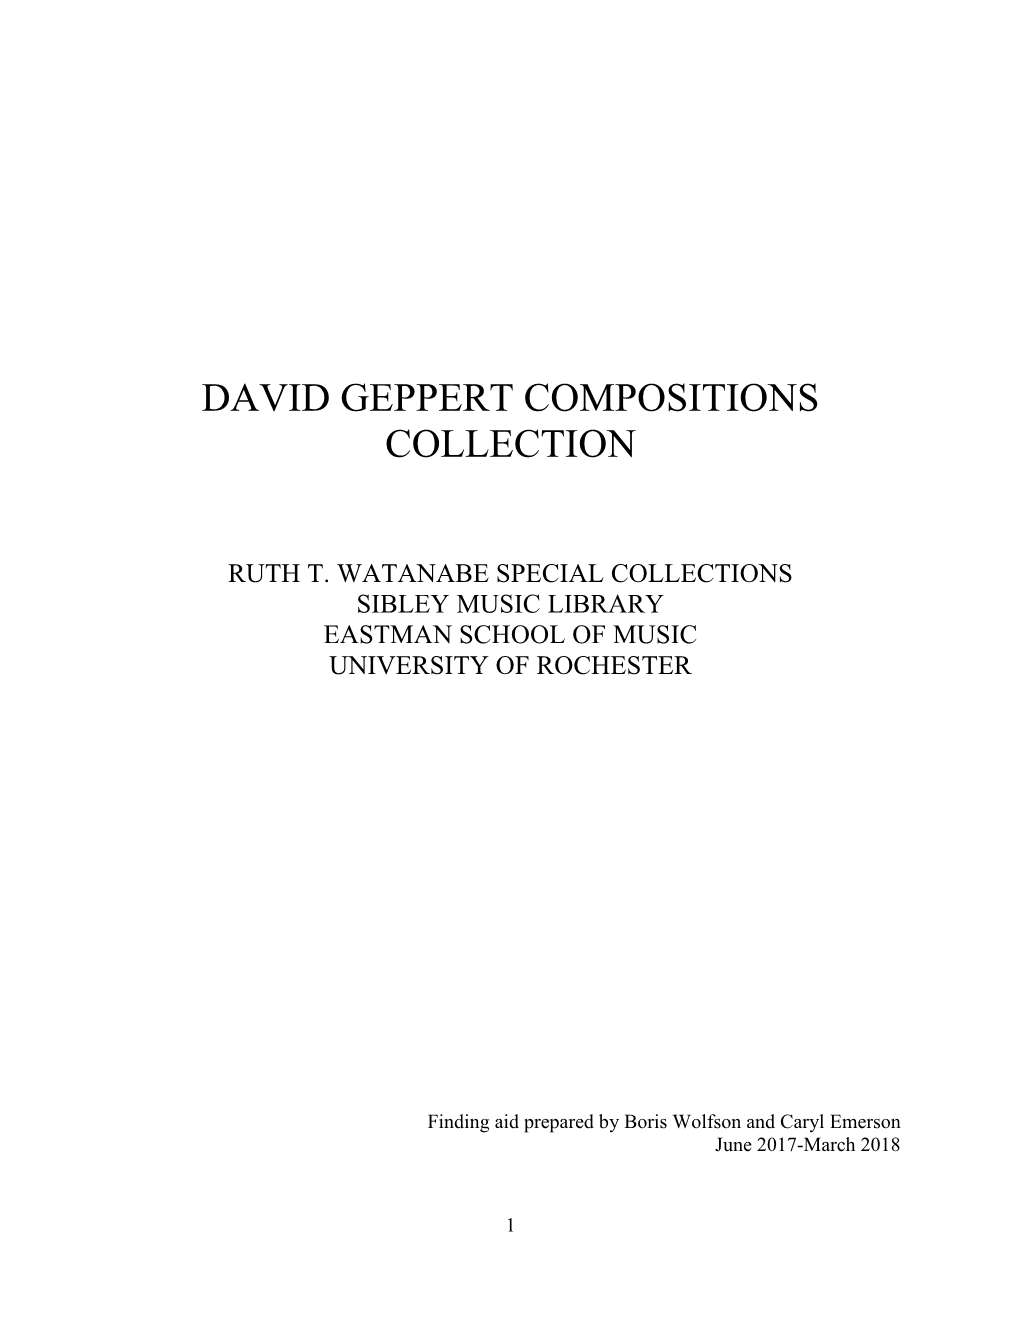 David Geppert Compositions Collection